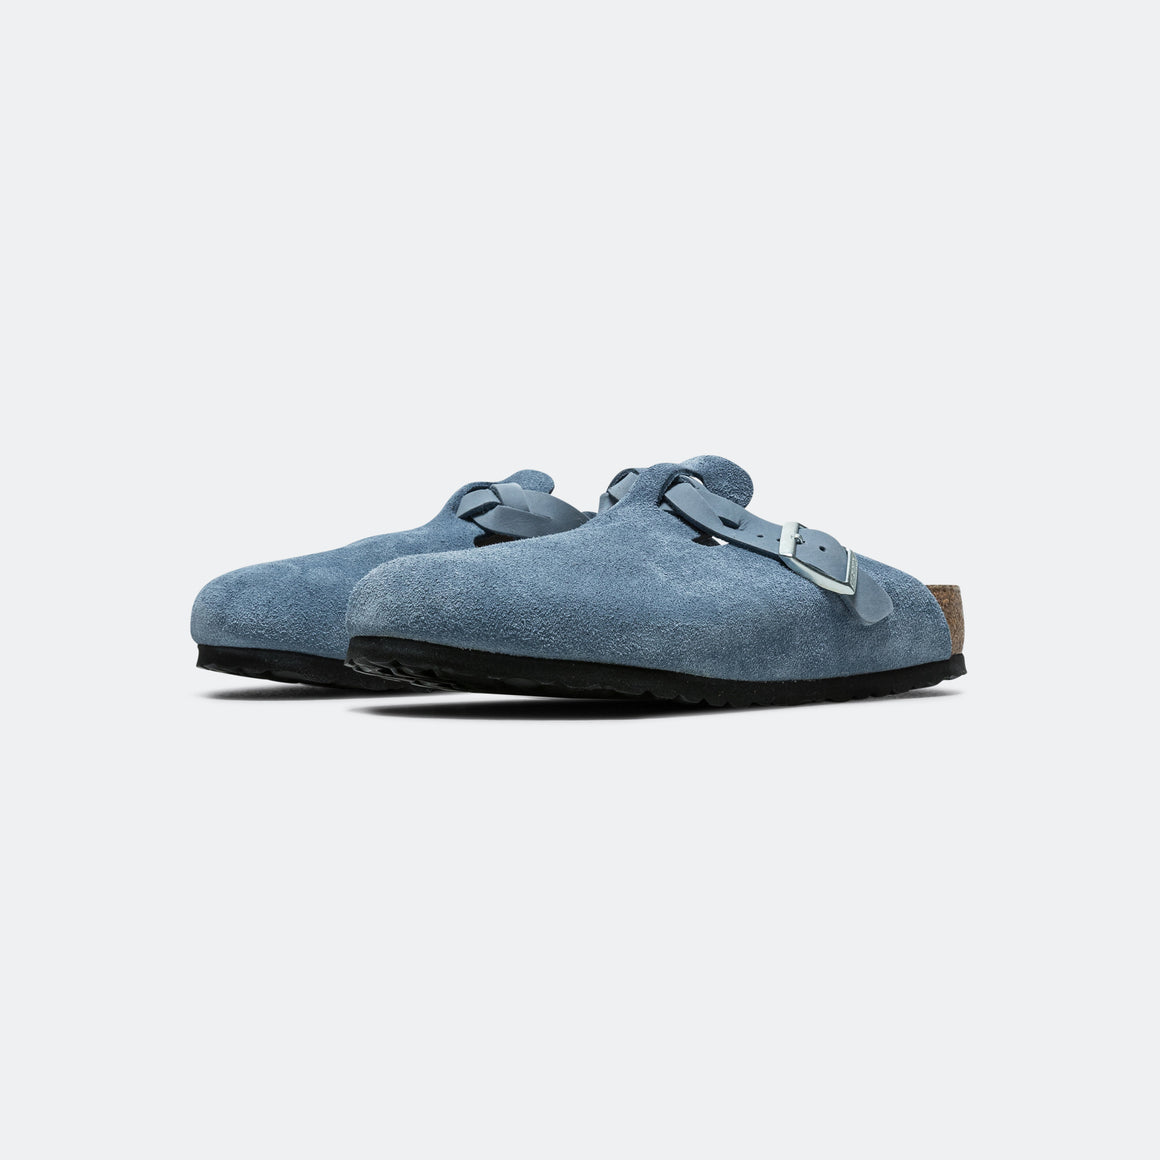 Birkenstock - Boston Braided - Elemental Blue Suede Leather - UP THERE